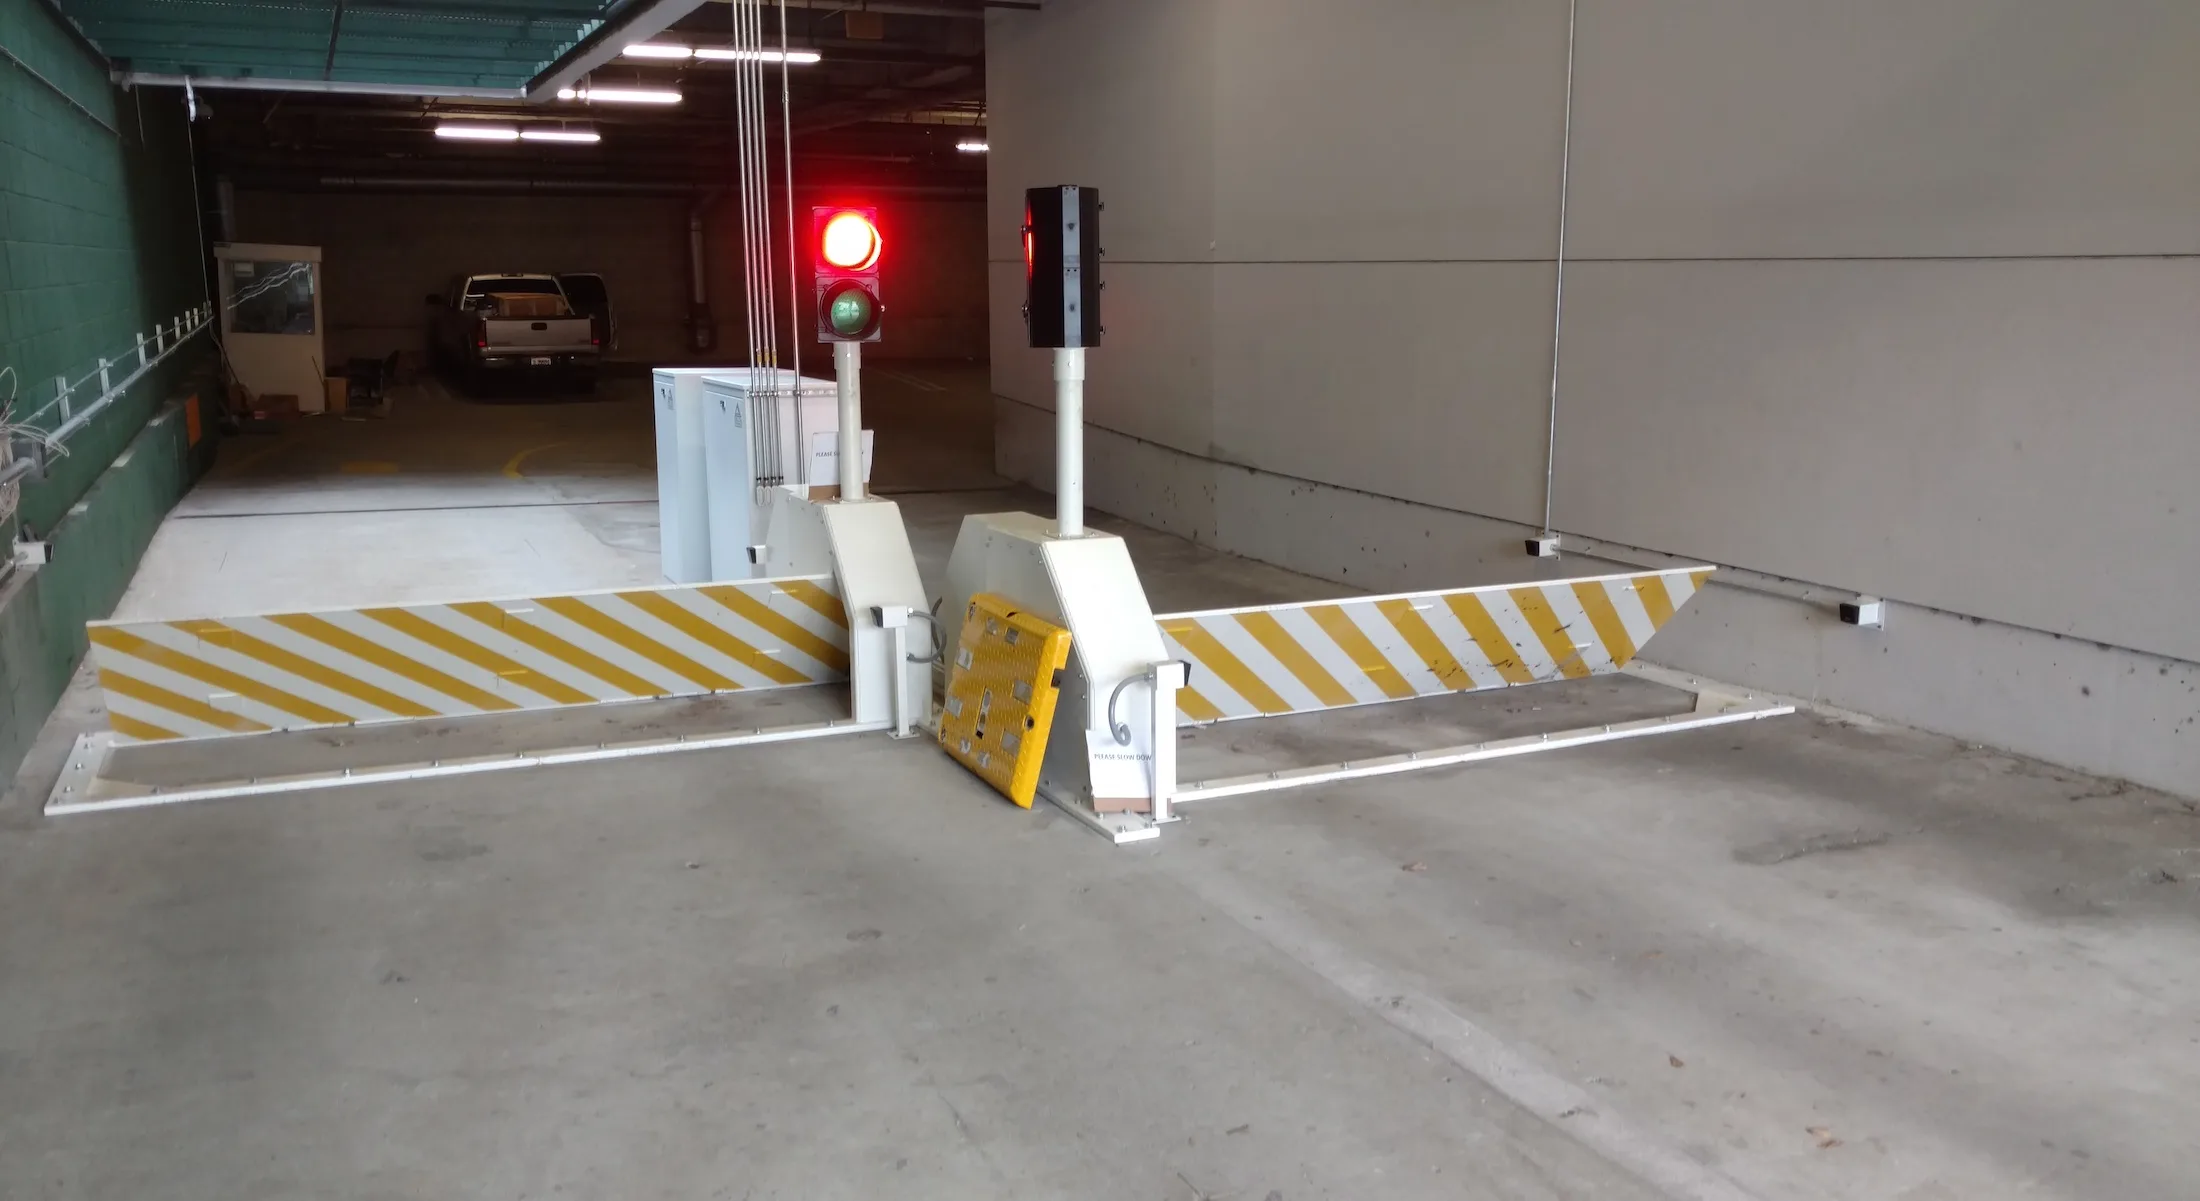 Delta Scientific's parking control barrier system deployed in an underground parking structure, complete with traffic light signals and striped barrier arms, facilitating secure vehicle access and traffic flow management.